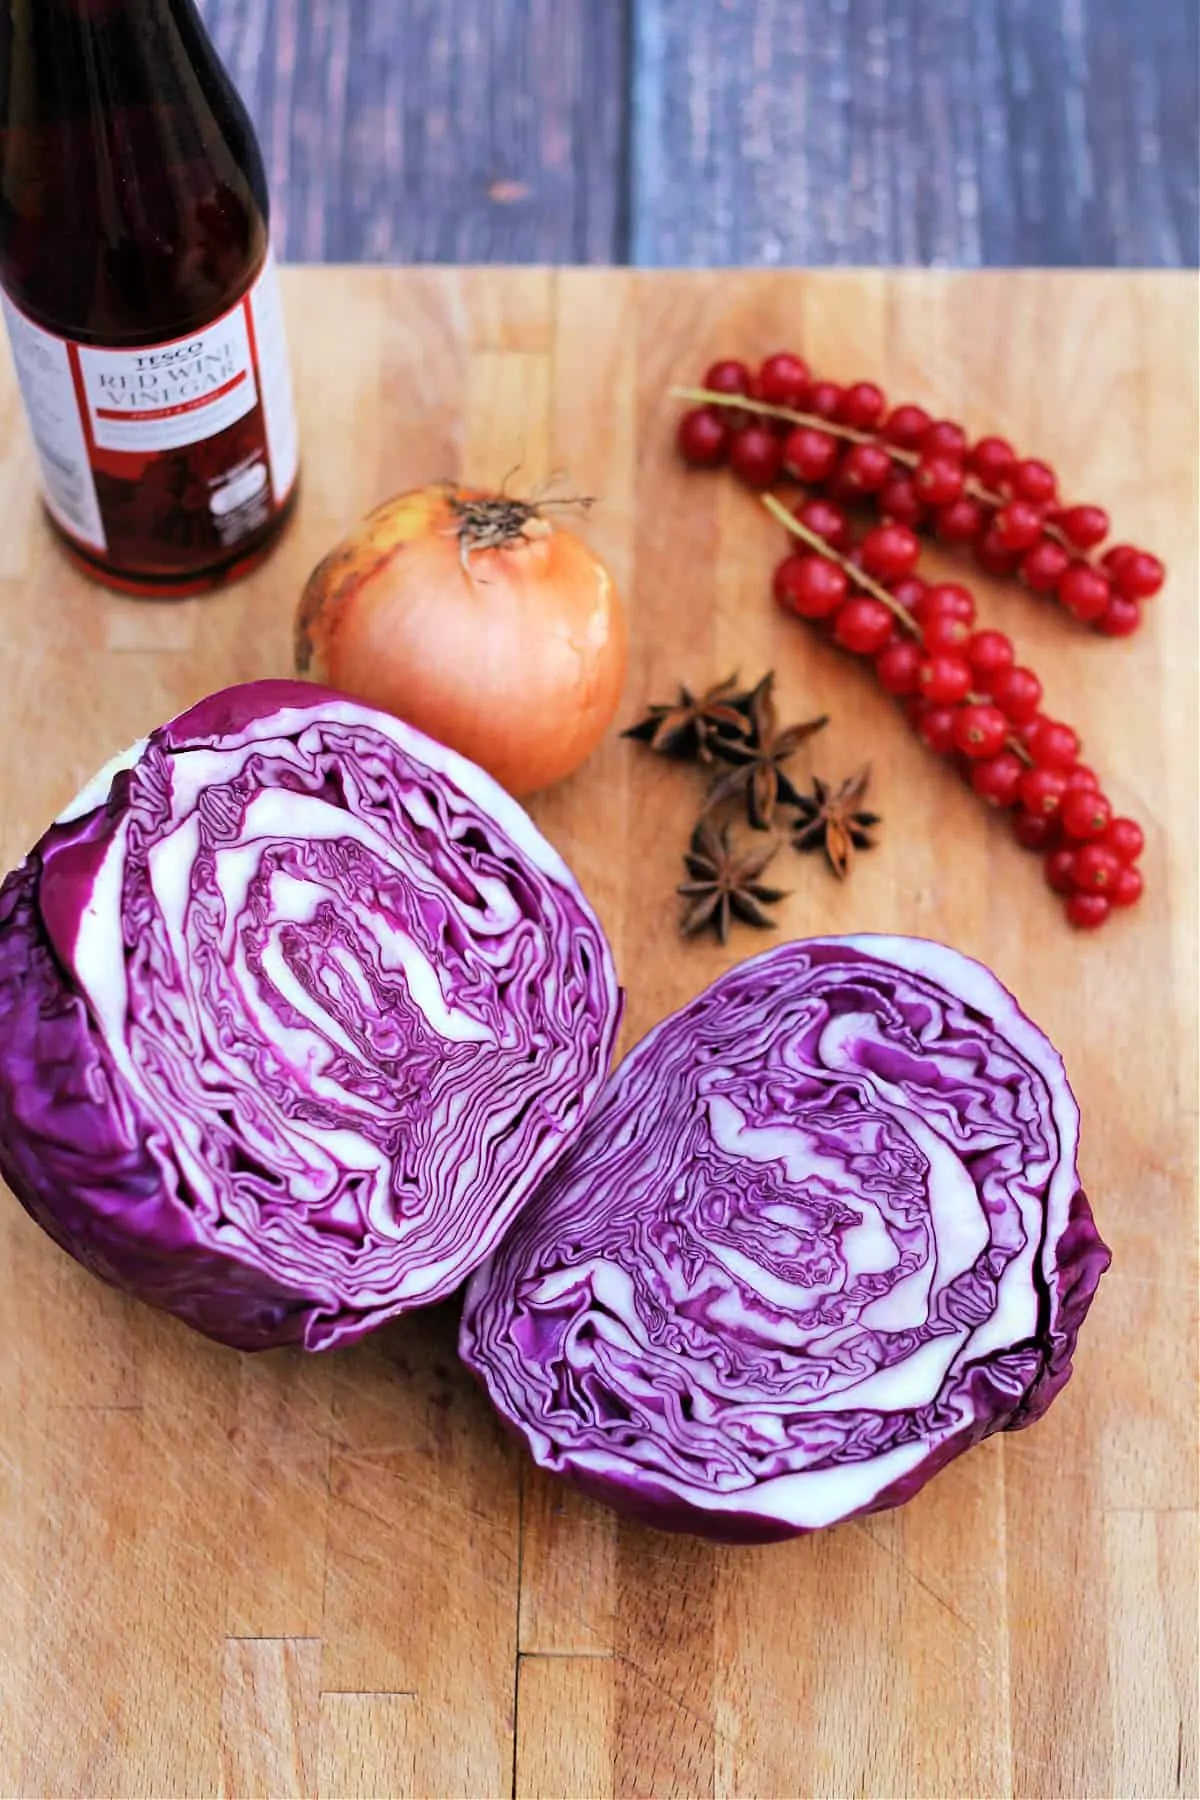 A halved red cabbage, onion, star anise and bottle of red wine vinegar on a board.